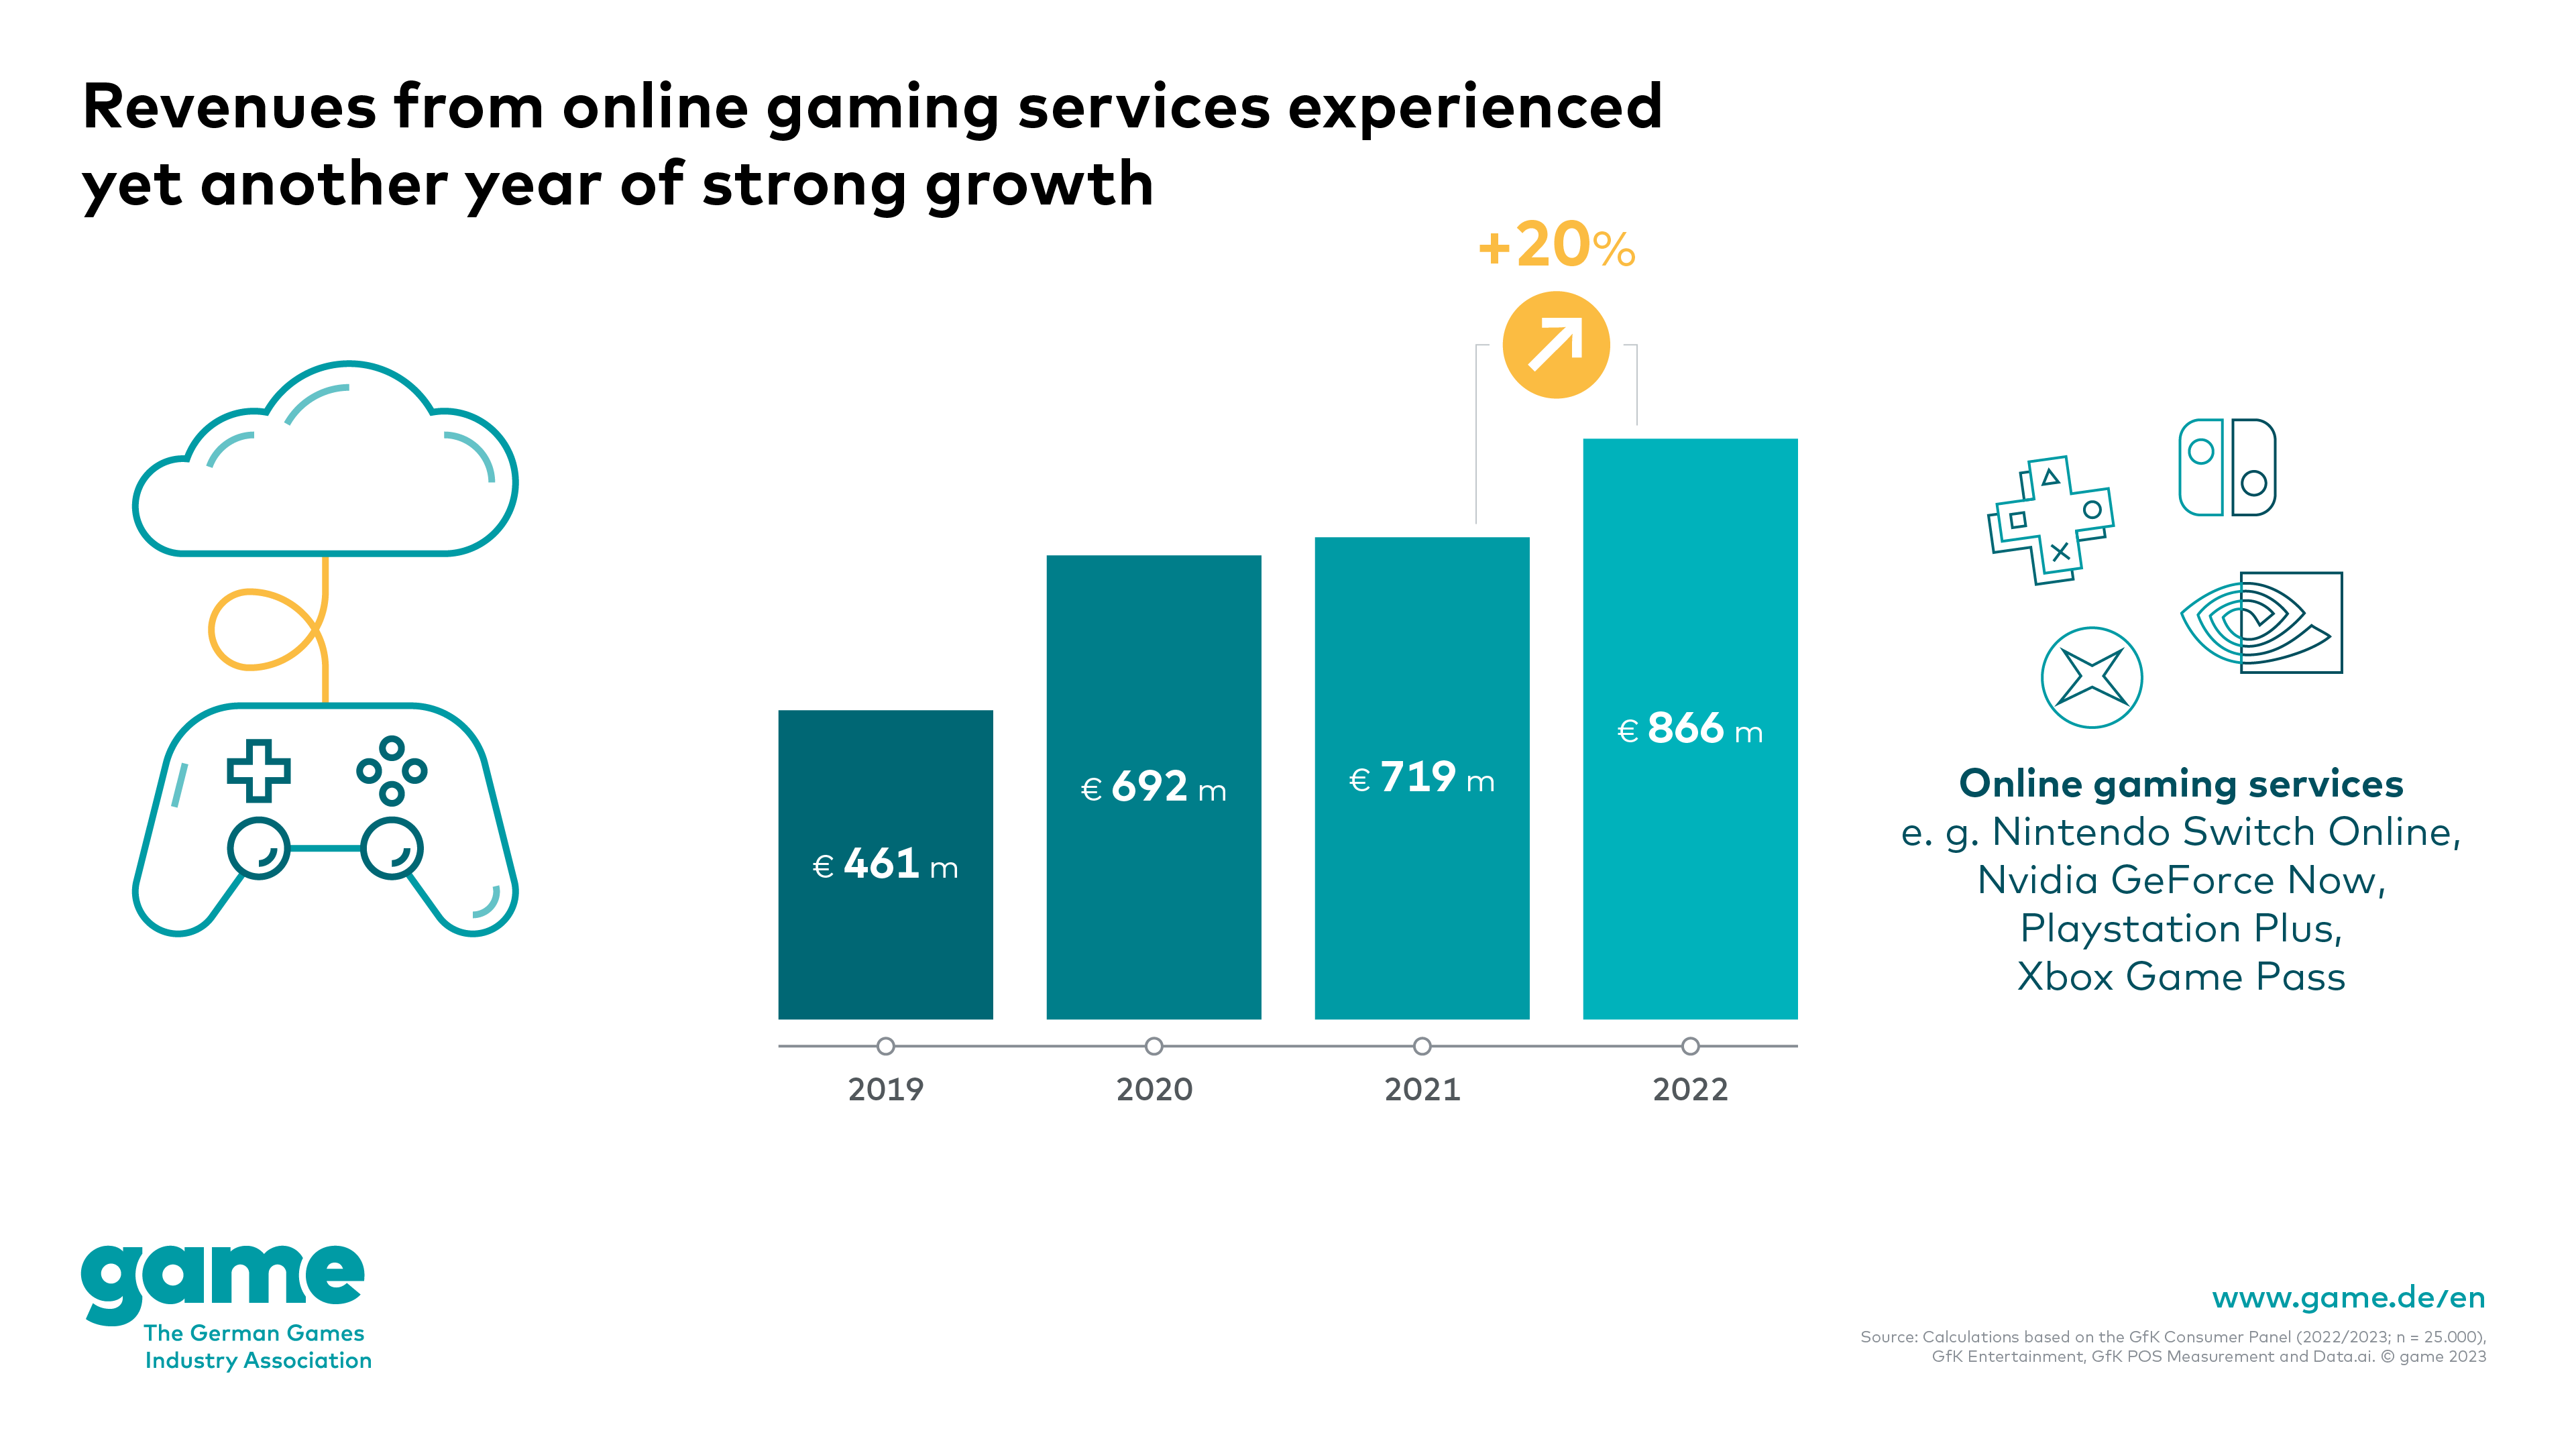 Revenue from online gaming services experienced yet another year of strong growth